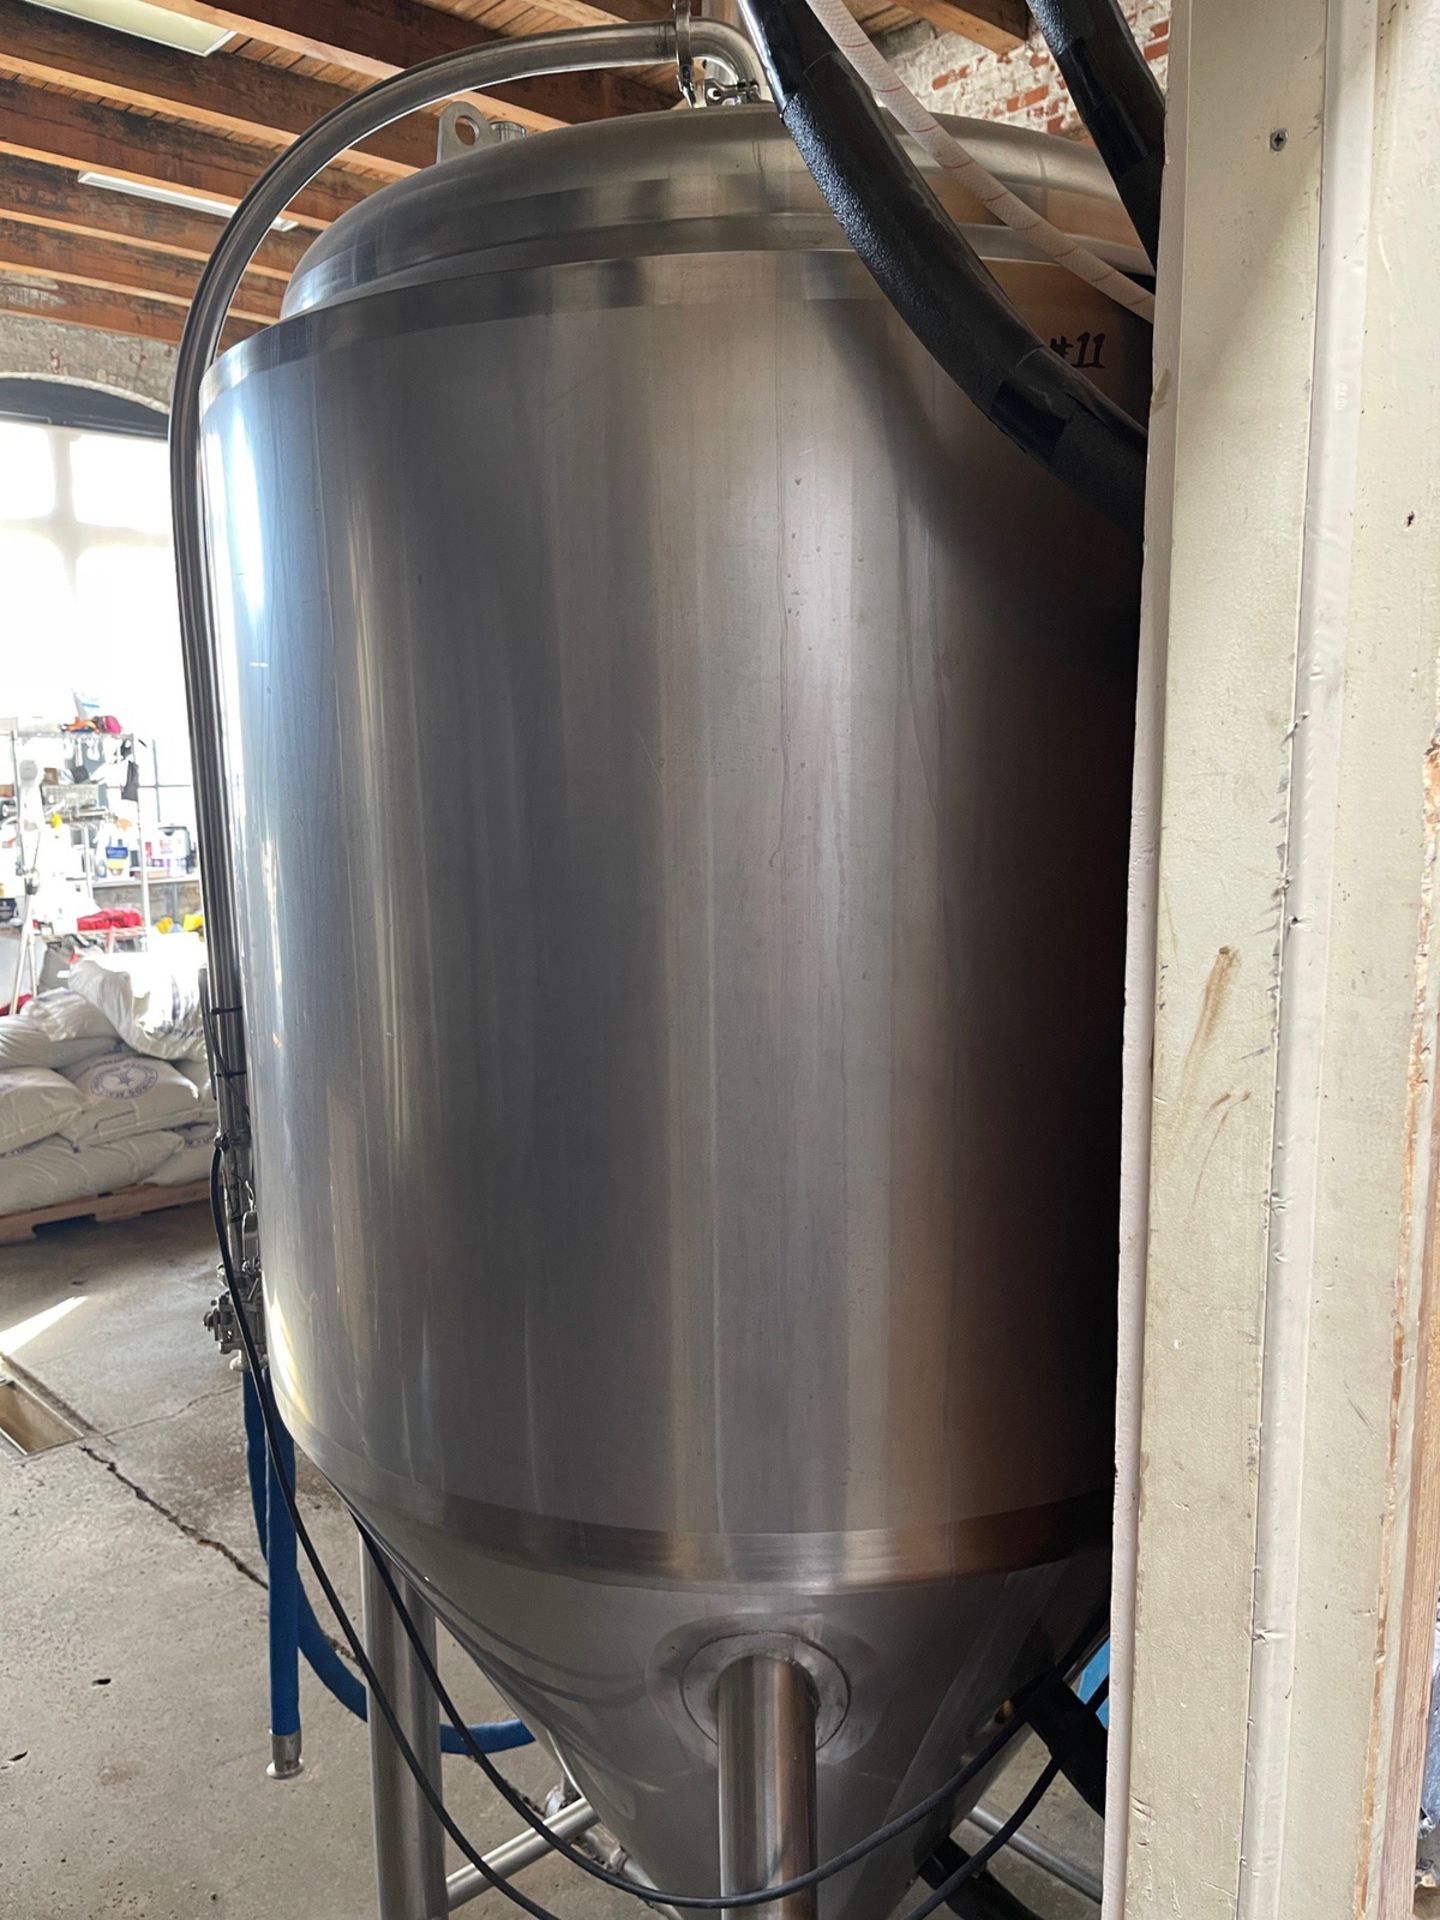 Blackstone 7 BBL Stainless Steel Fermentation Tank (Approx: 4' x 8'6") | Rig Fee $450 - Image 3 of 3